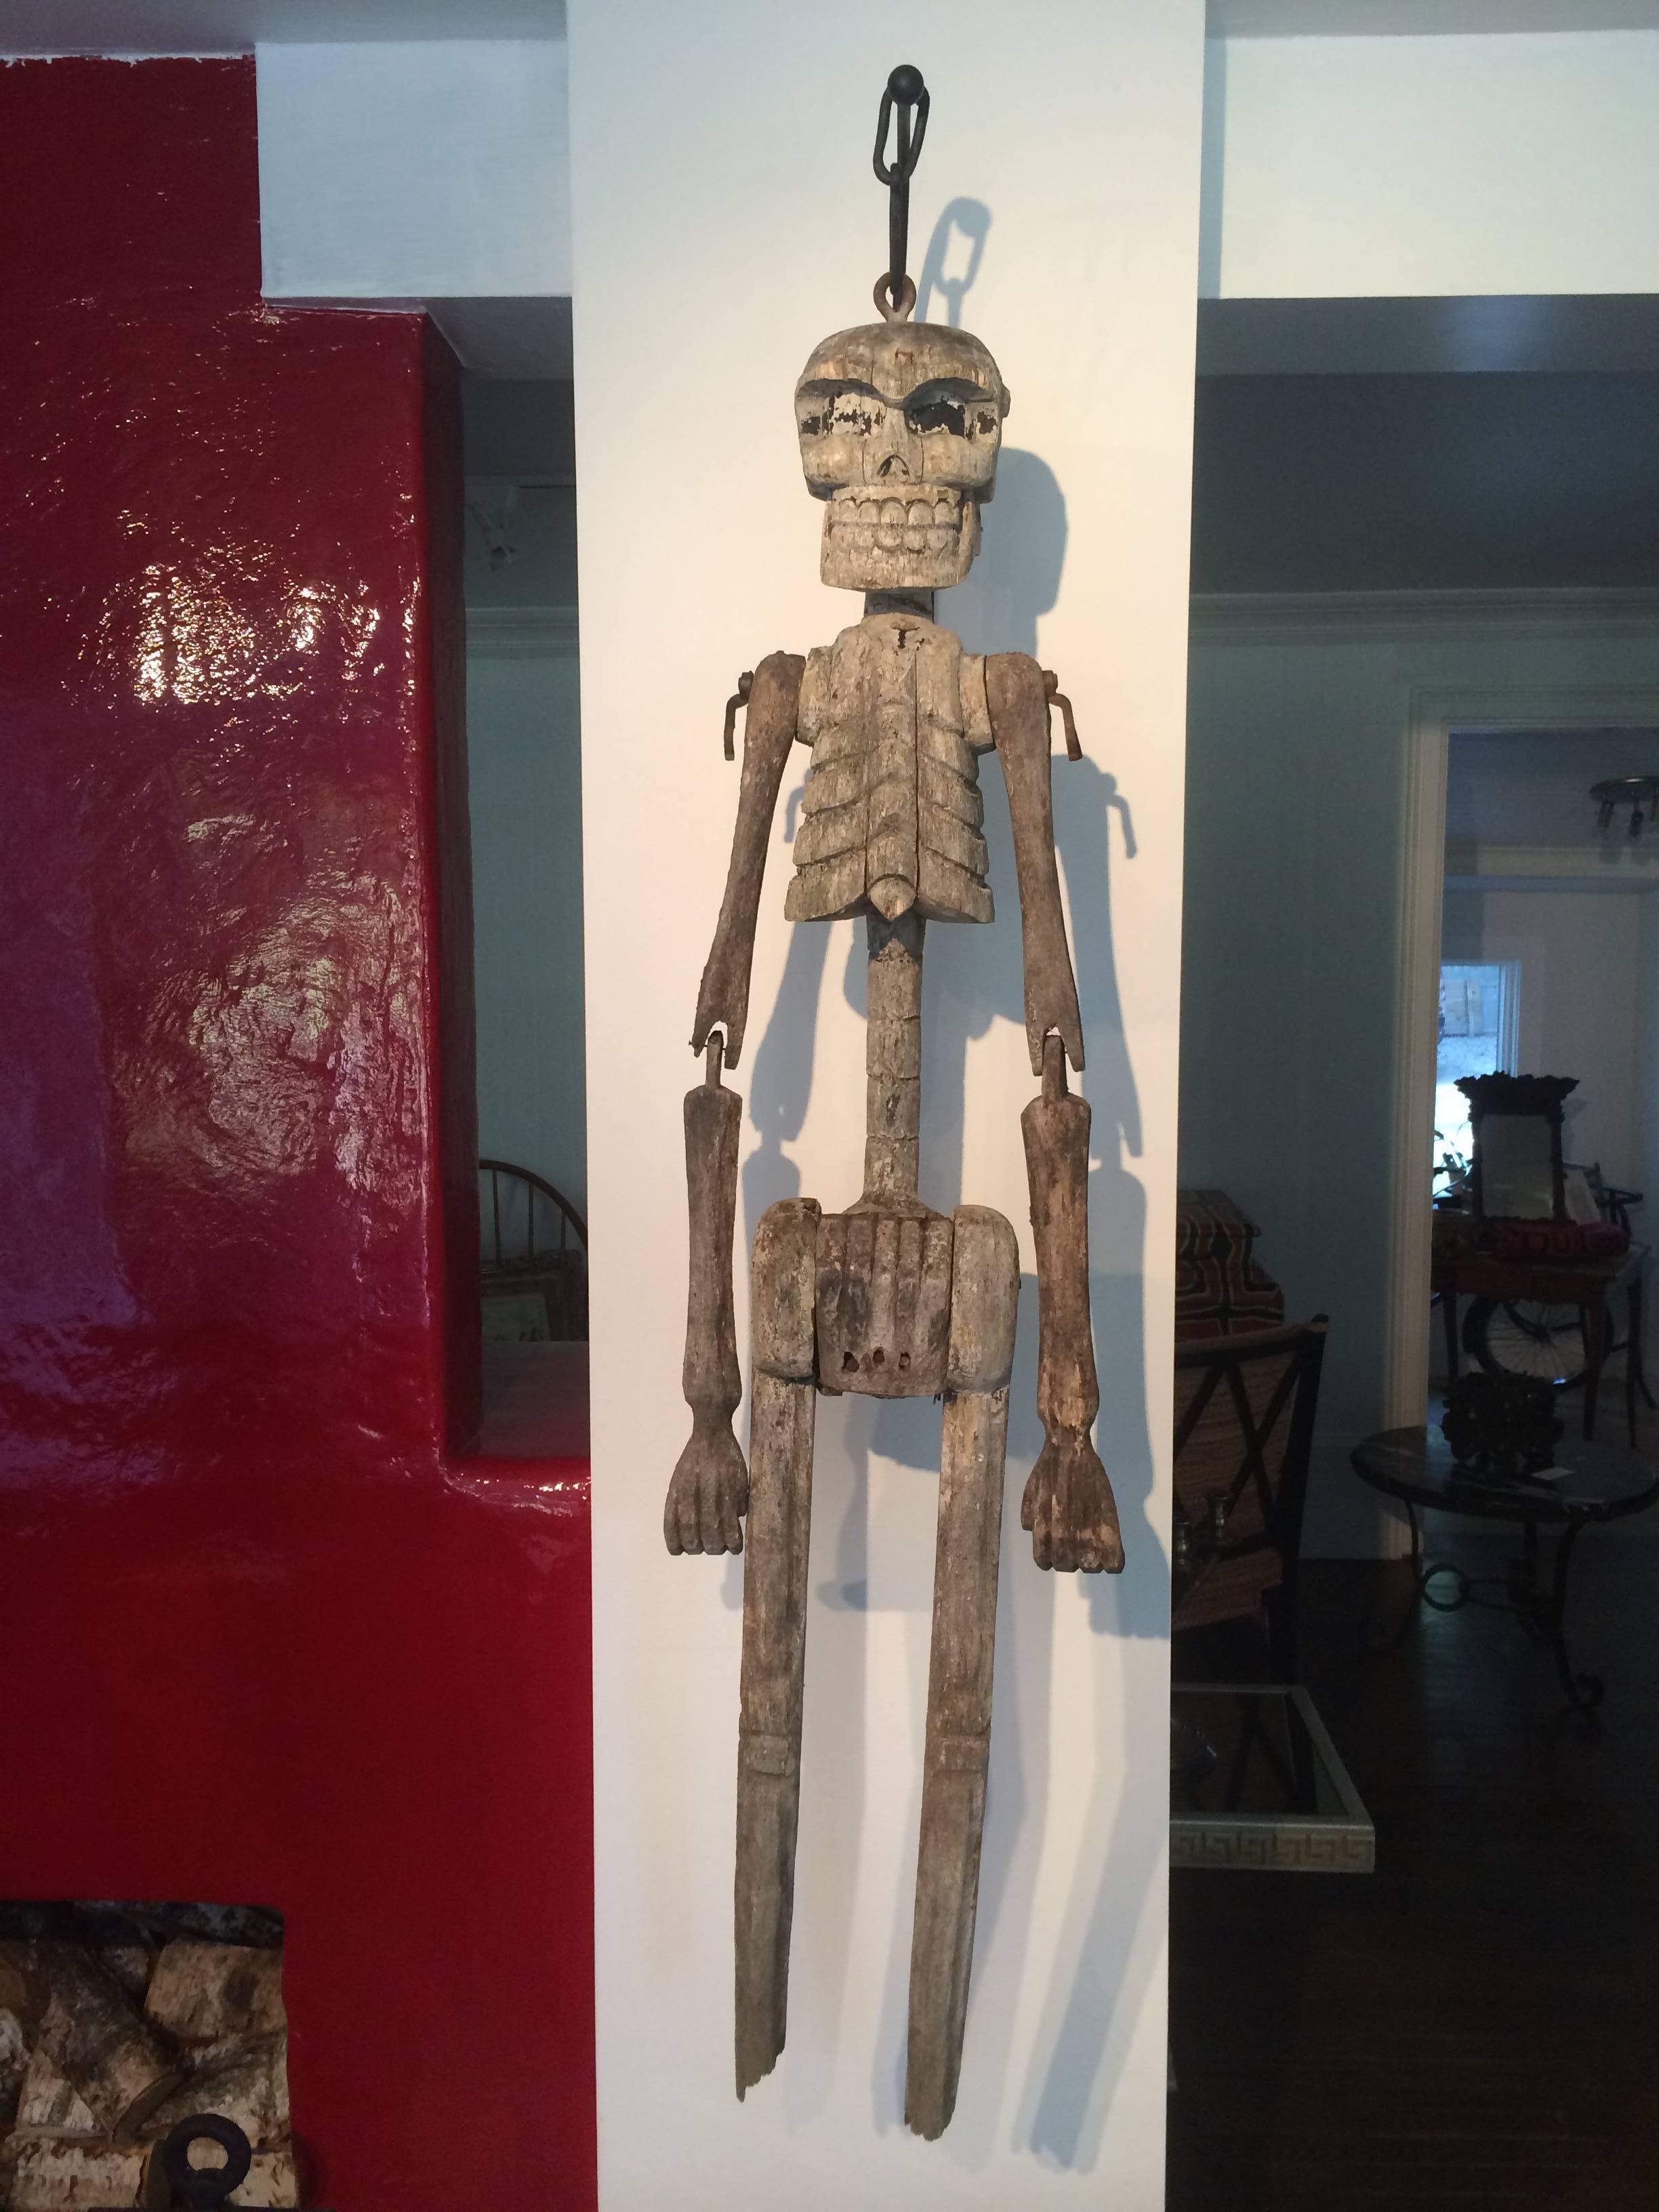 An early 20th century, Mexican "Day of the Dead" carved cactus articulating skeleton. Custom (new) iron wall hanging mount included.